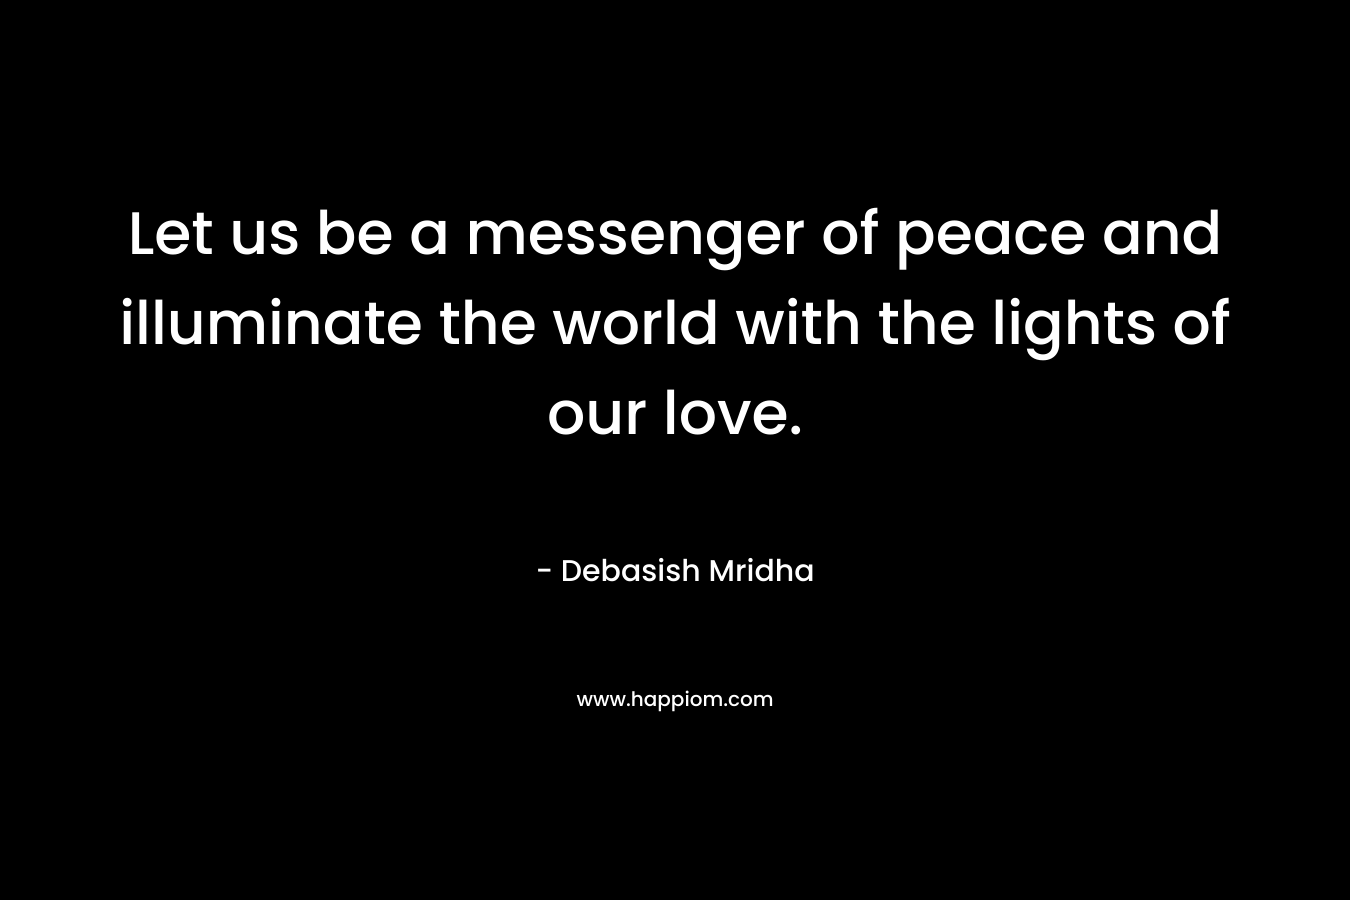 Let us be a messenger of peace and illuminate the world with the lights of our love.